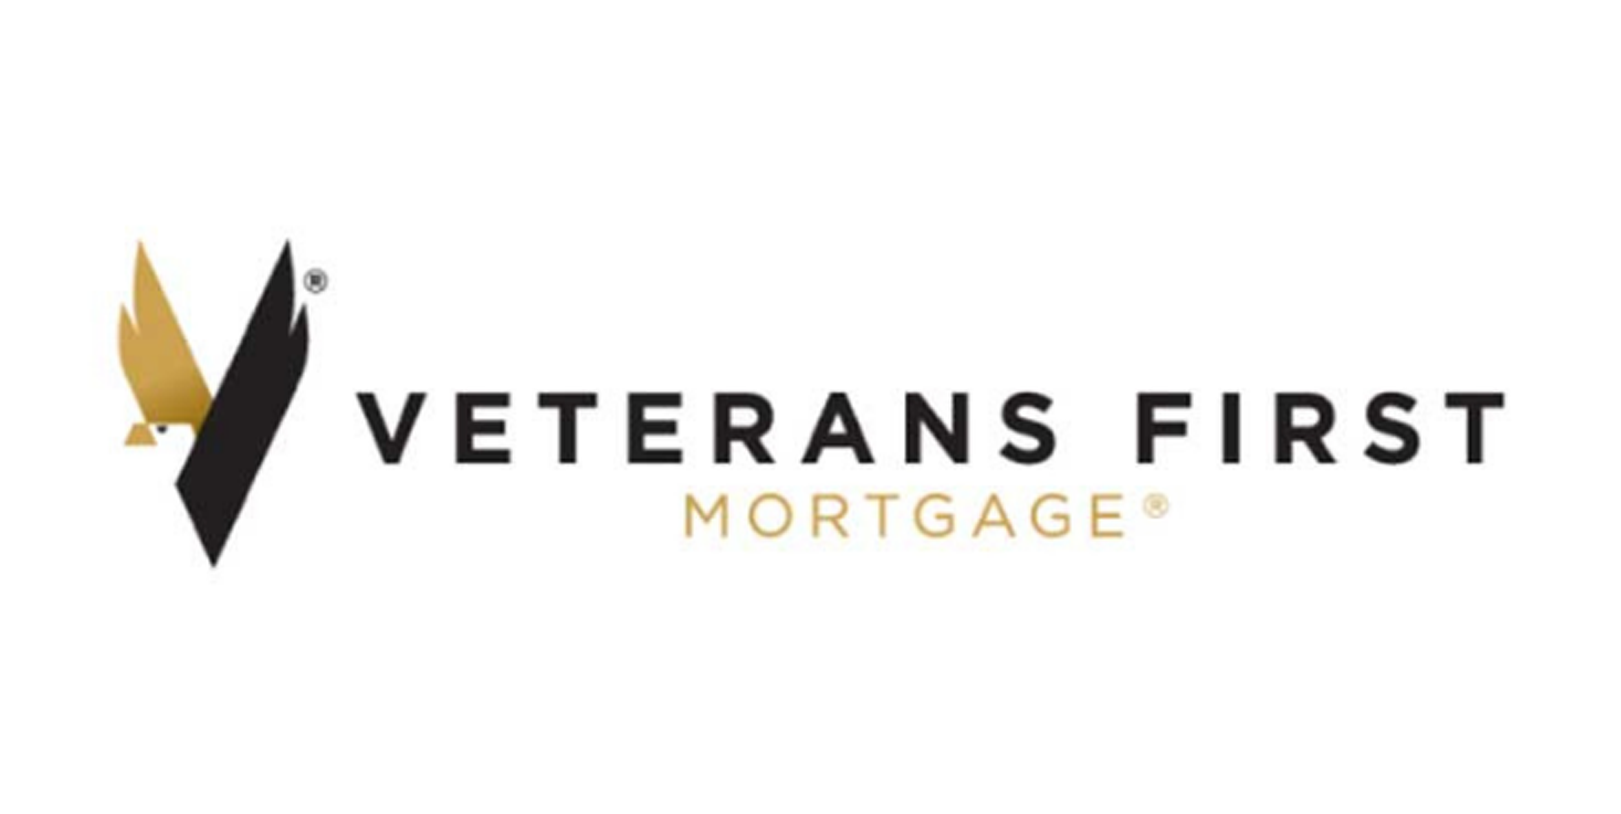 The Malinois Foundation - Trusted Utah Veterans Veterans First Mortgage